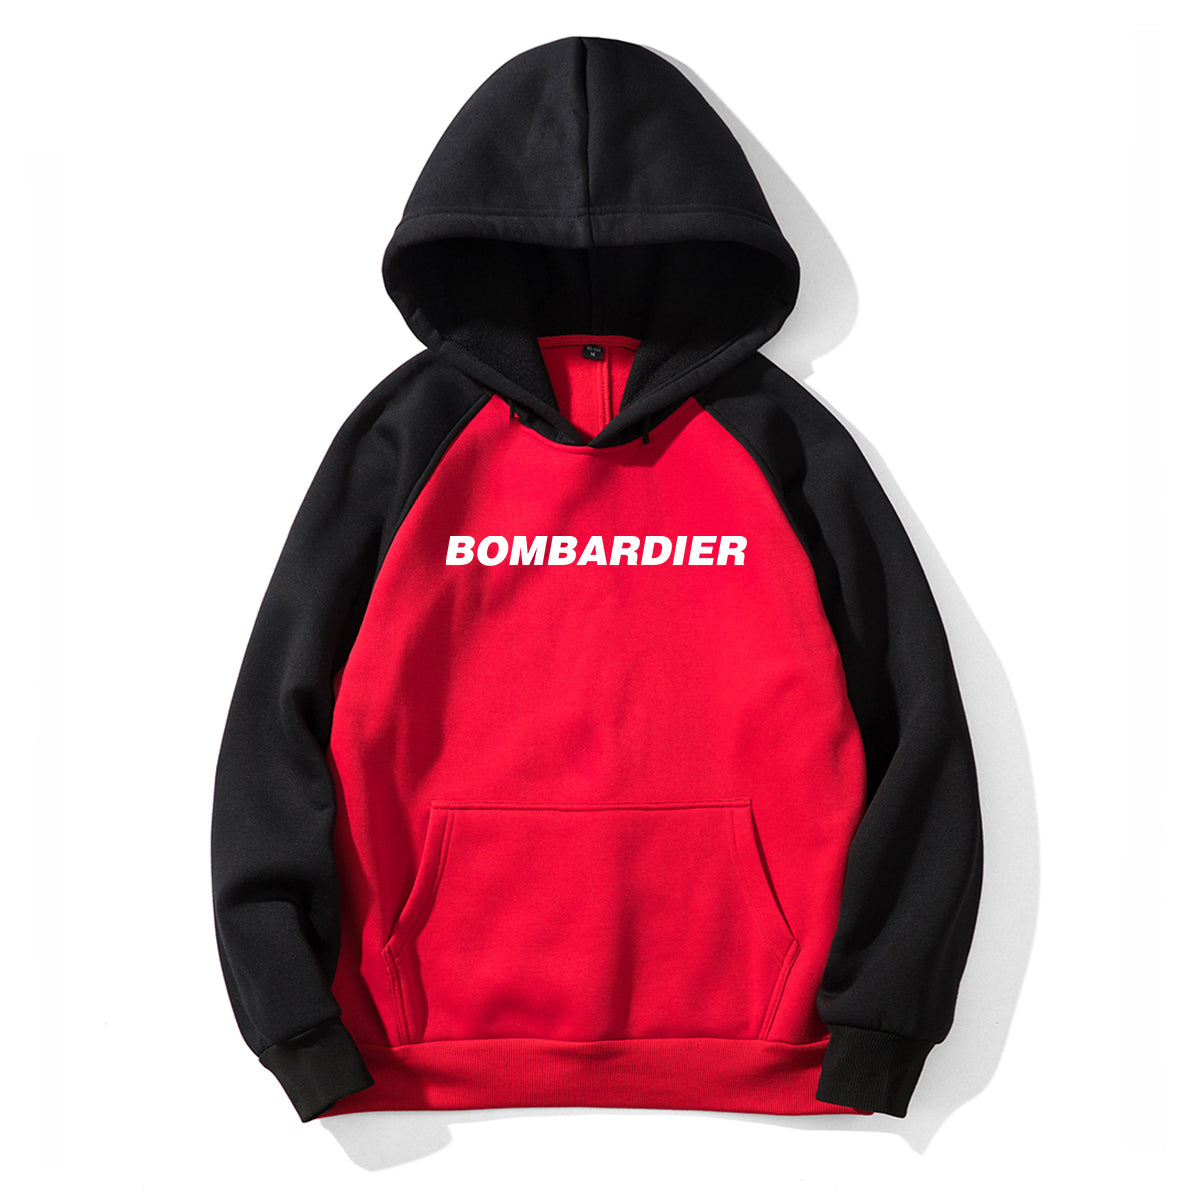 Bombardier & Text Designed Colourful Hoodies